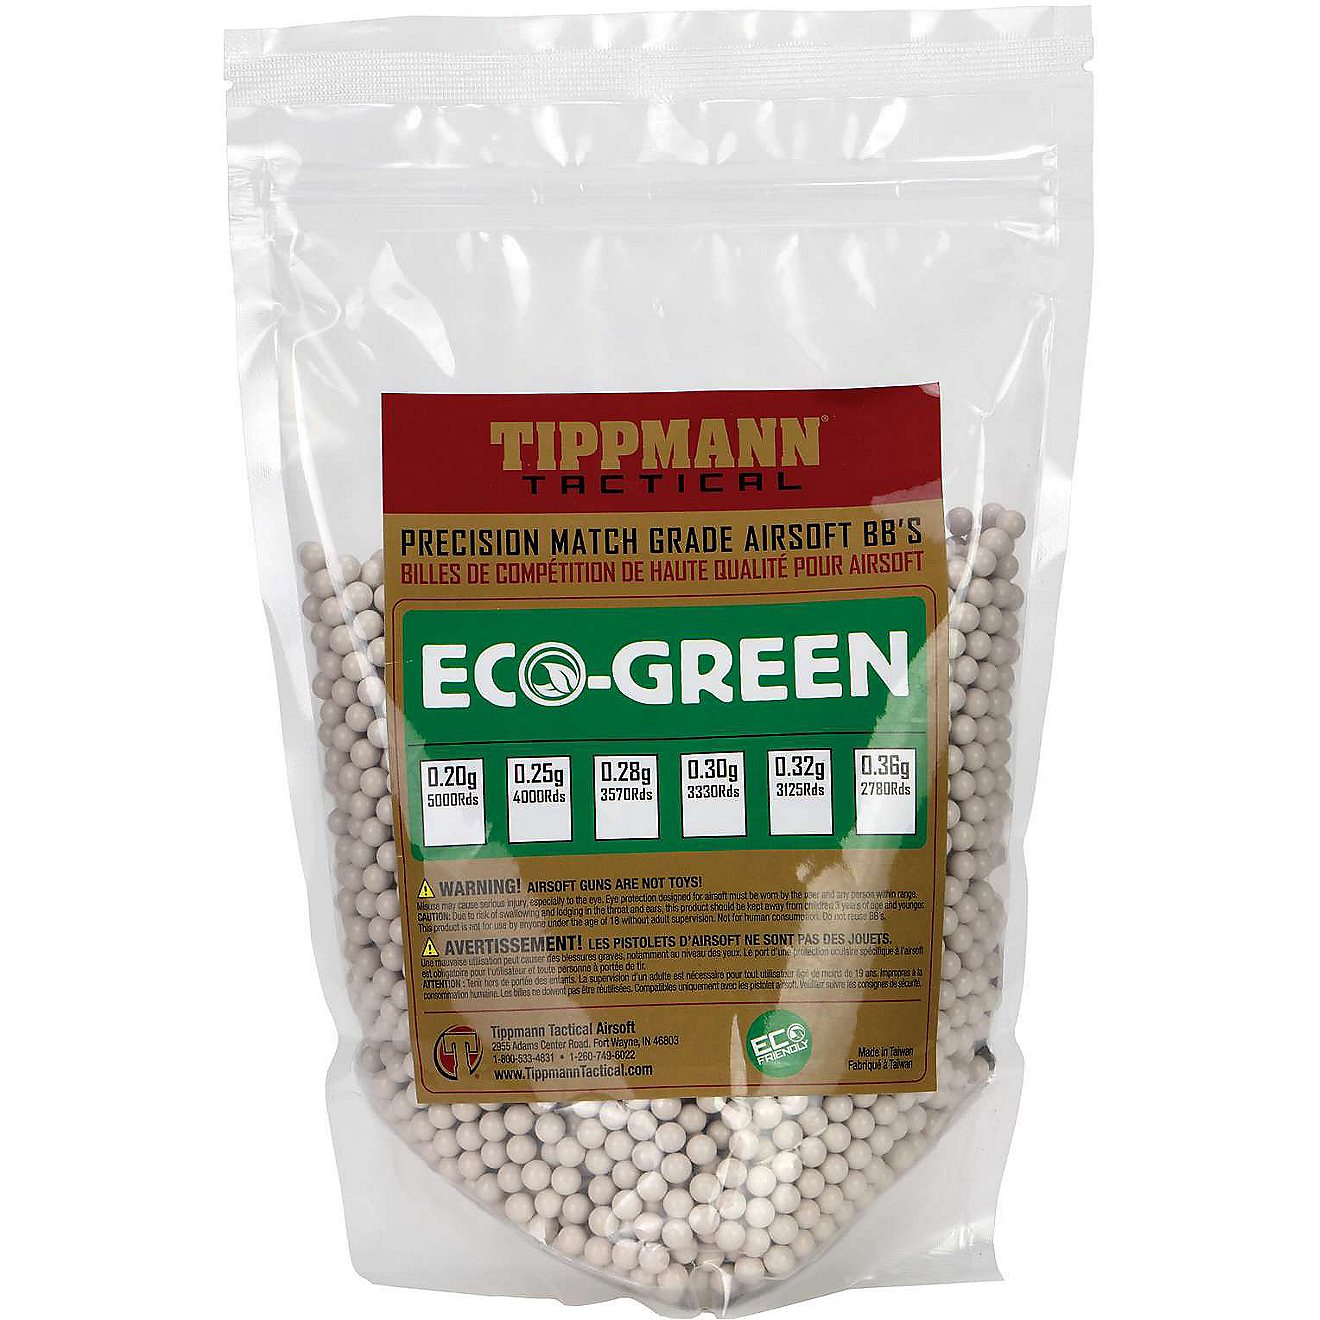 Tippmann Eco-Green Tactical Precision Match Grade 0.25 g Airsoft BBs 4,000-Count                                                 - view number 1